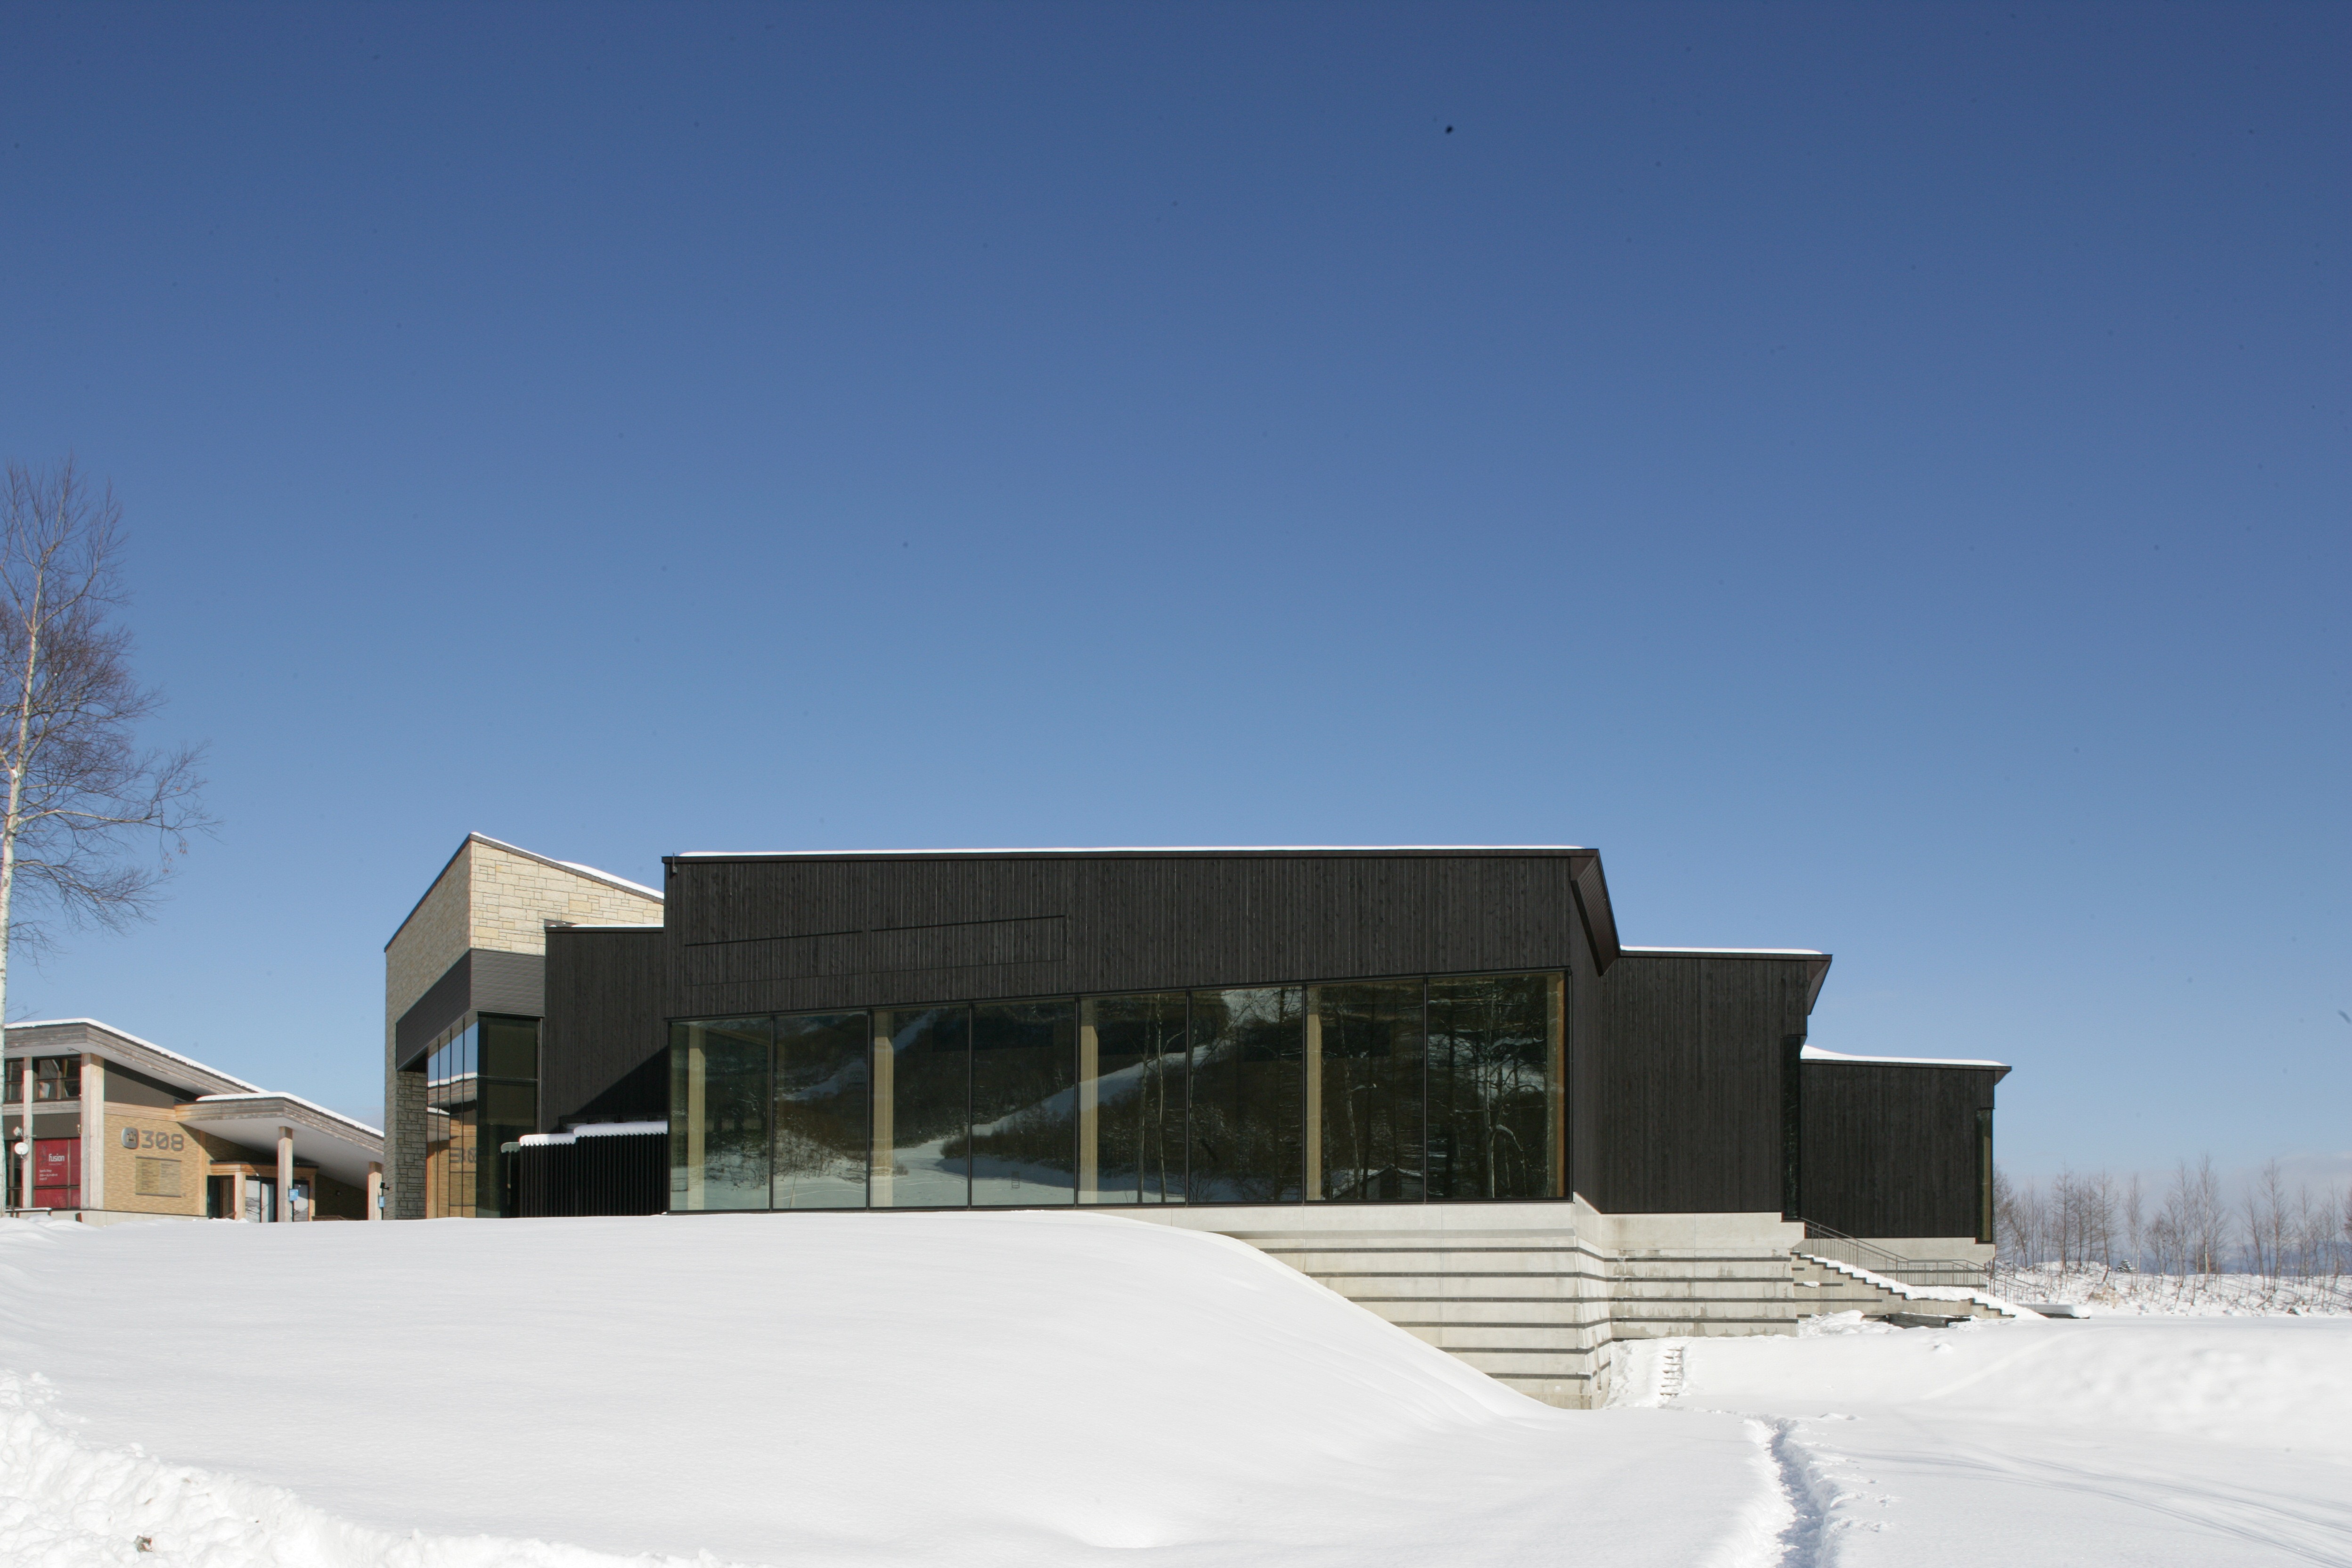 Part of the Hanazono resort in Niseko, Japan, in which Hong Kong’s Richard Li has invested US$930 million.